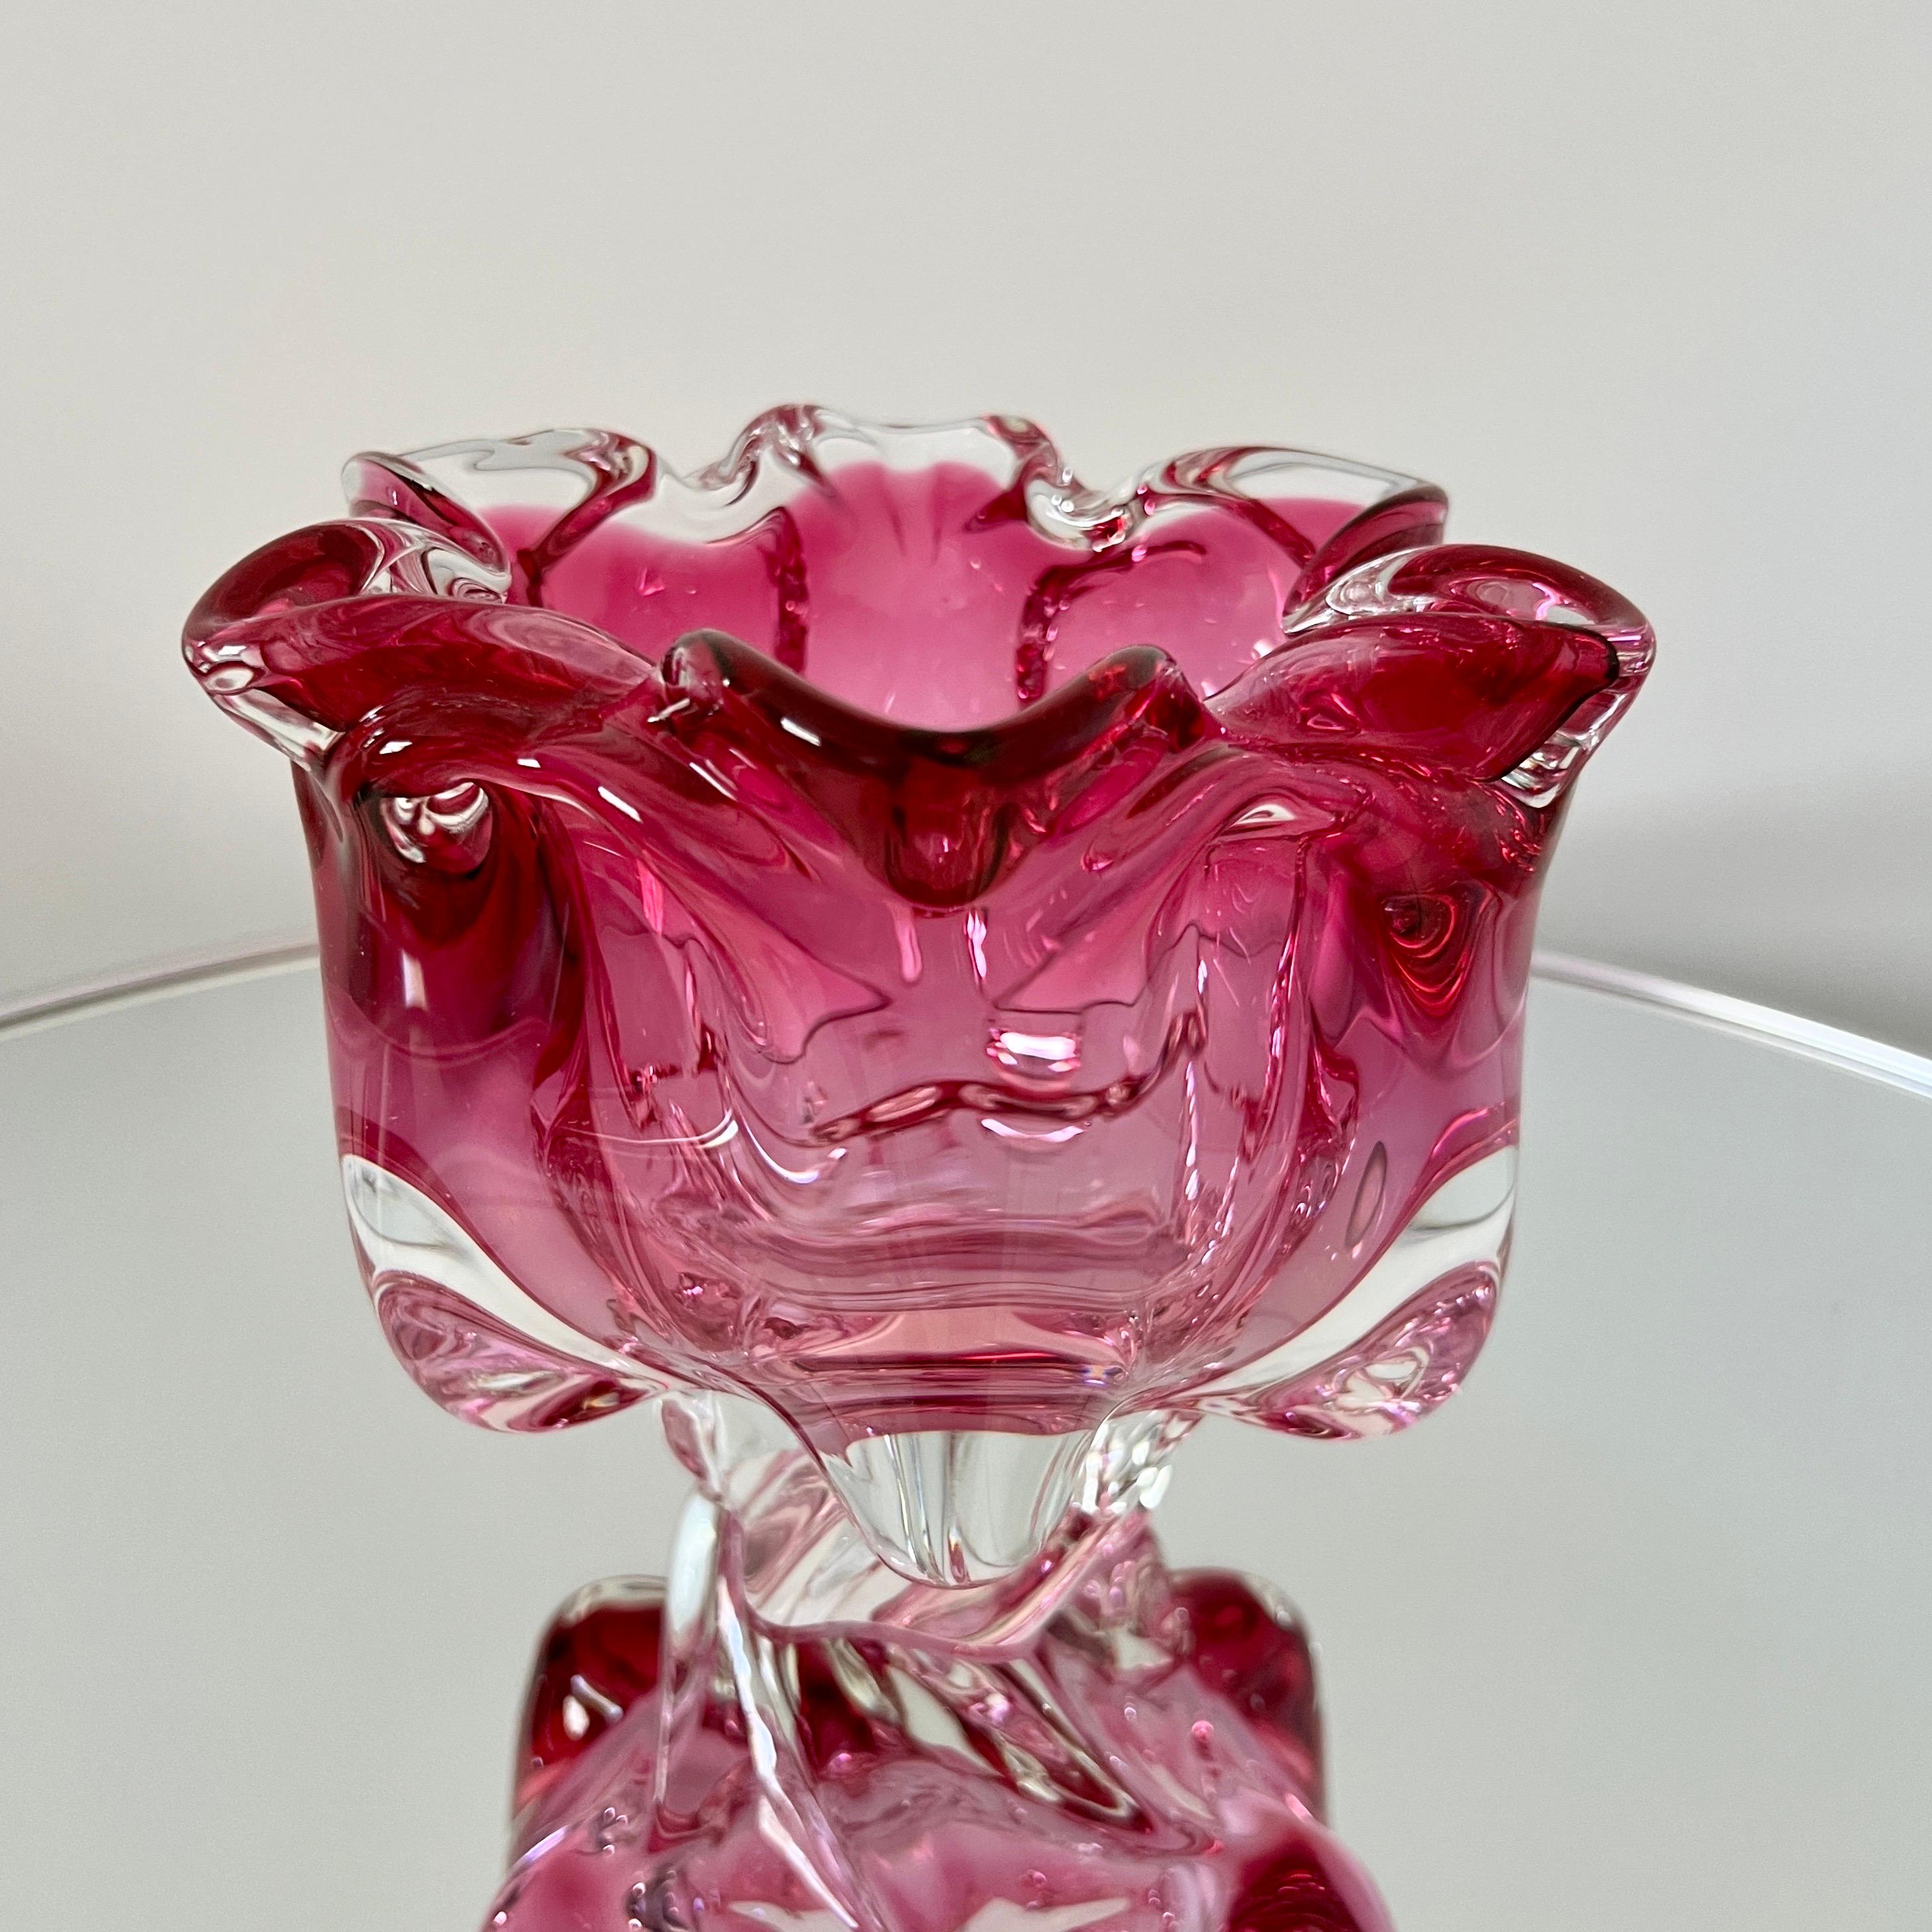 Italian Pink Murano Floral Vase with Footed Base by Fratelli Toso, c. 1950's For Sale